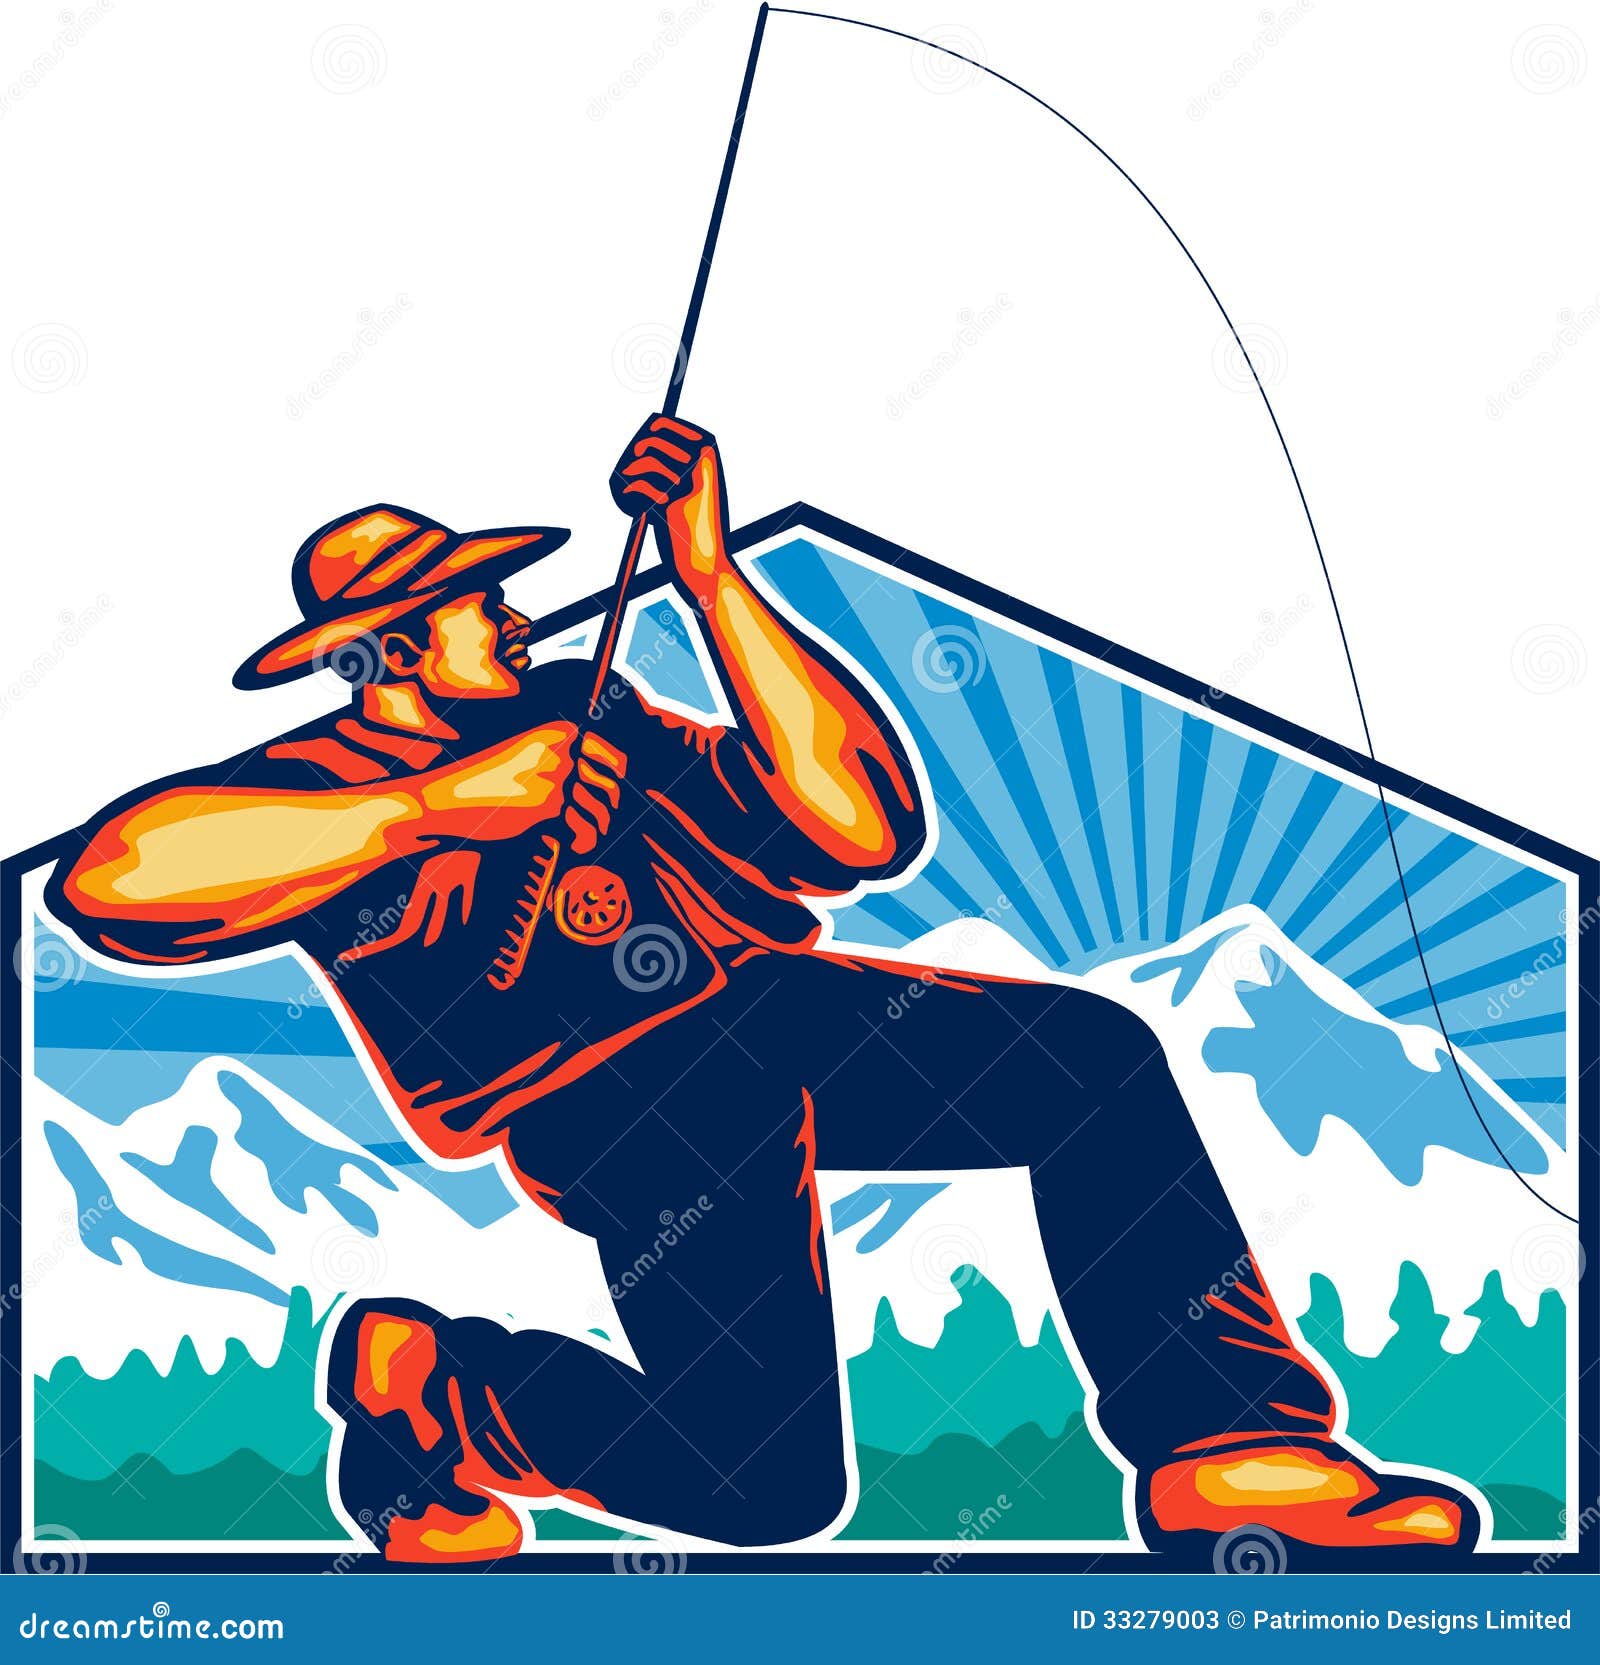 https://thumbs.dreamstime.com/z/fly-fisherman-reeling-fishing-rod-retro-illustration-casting-reel-viewed-trees-snow-mountains-background-33279003.jpg